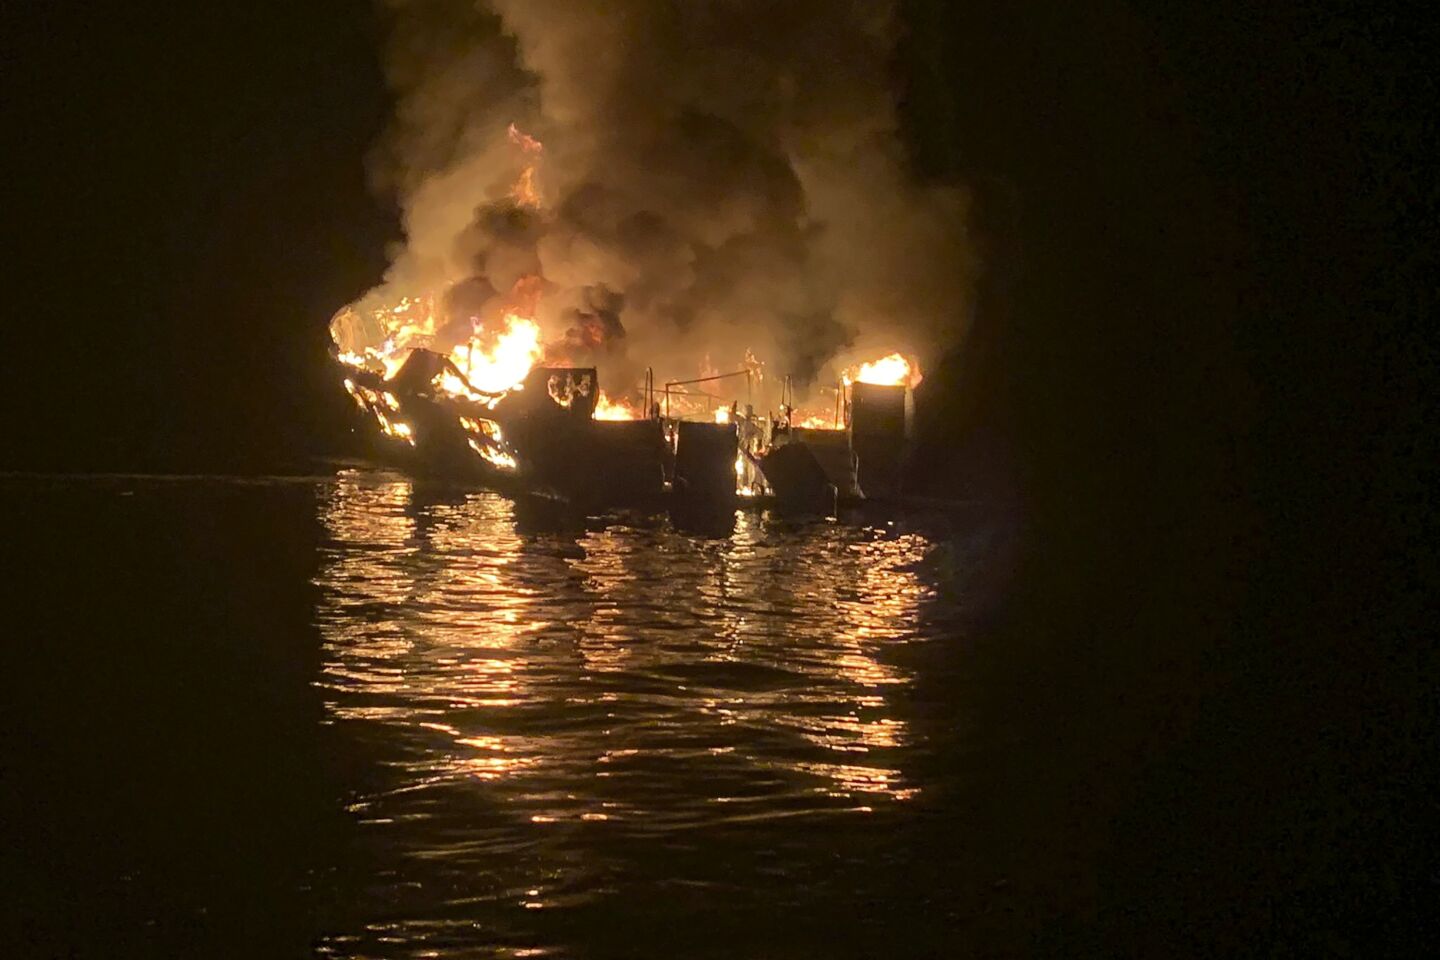 The dive boat Conception is engulfed in flames after a deadly fire broke out aboard the vessel off the Southern California Coast.